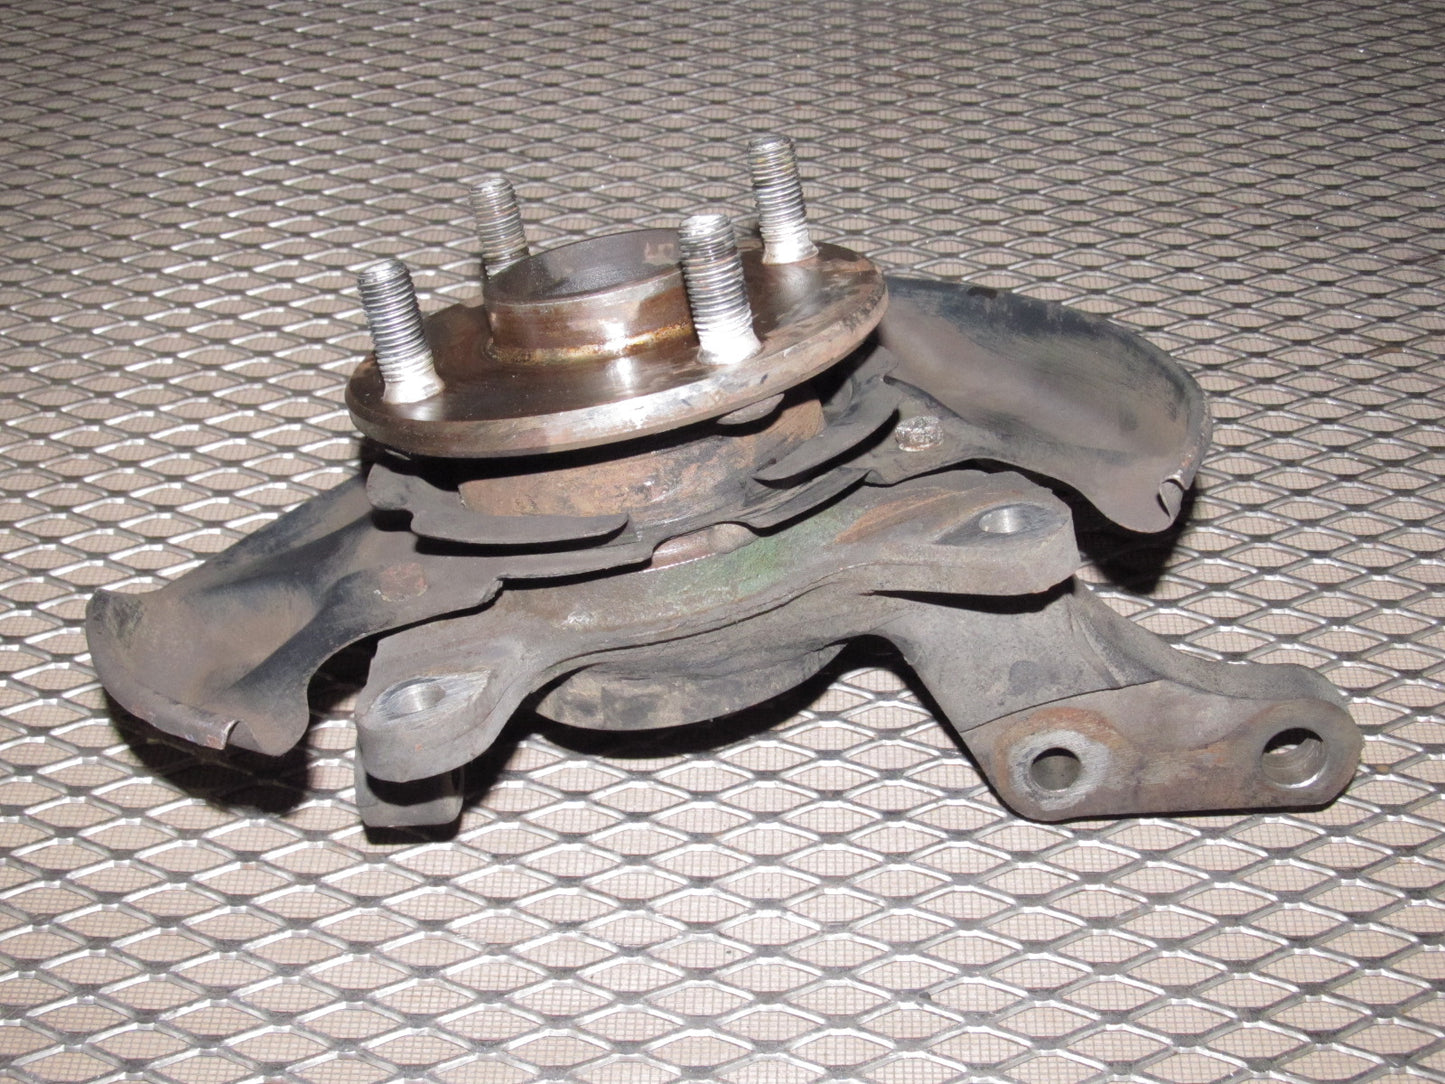 85 86 Toyota MR2 OEM Rear Spindle & Knuckle Assembly - Right